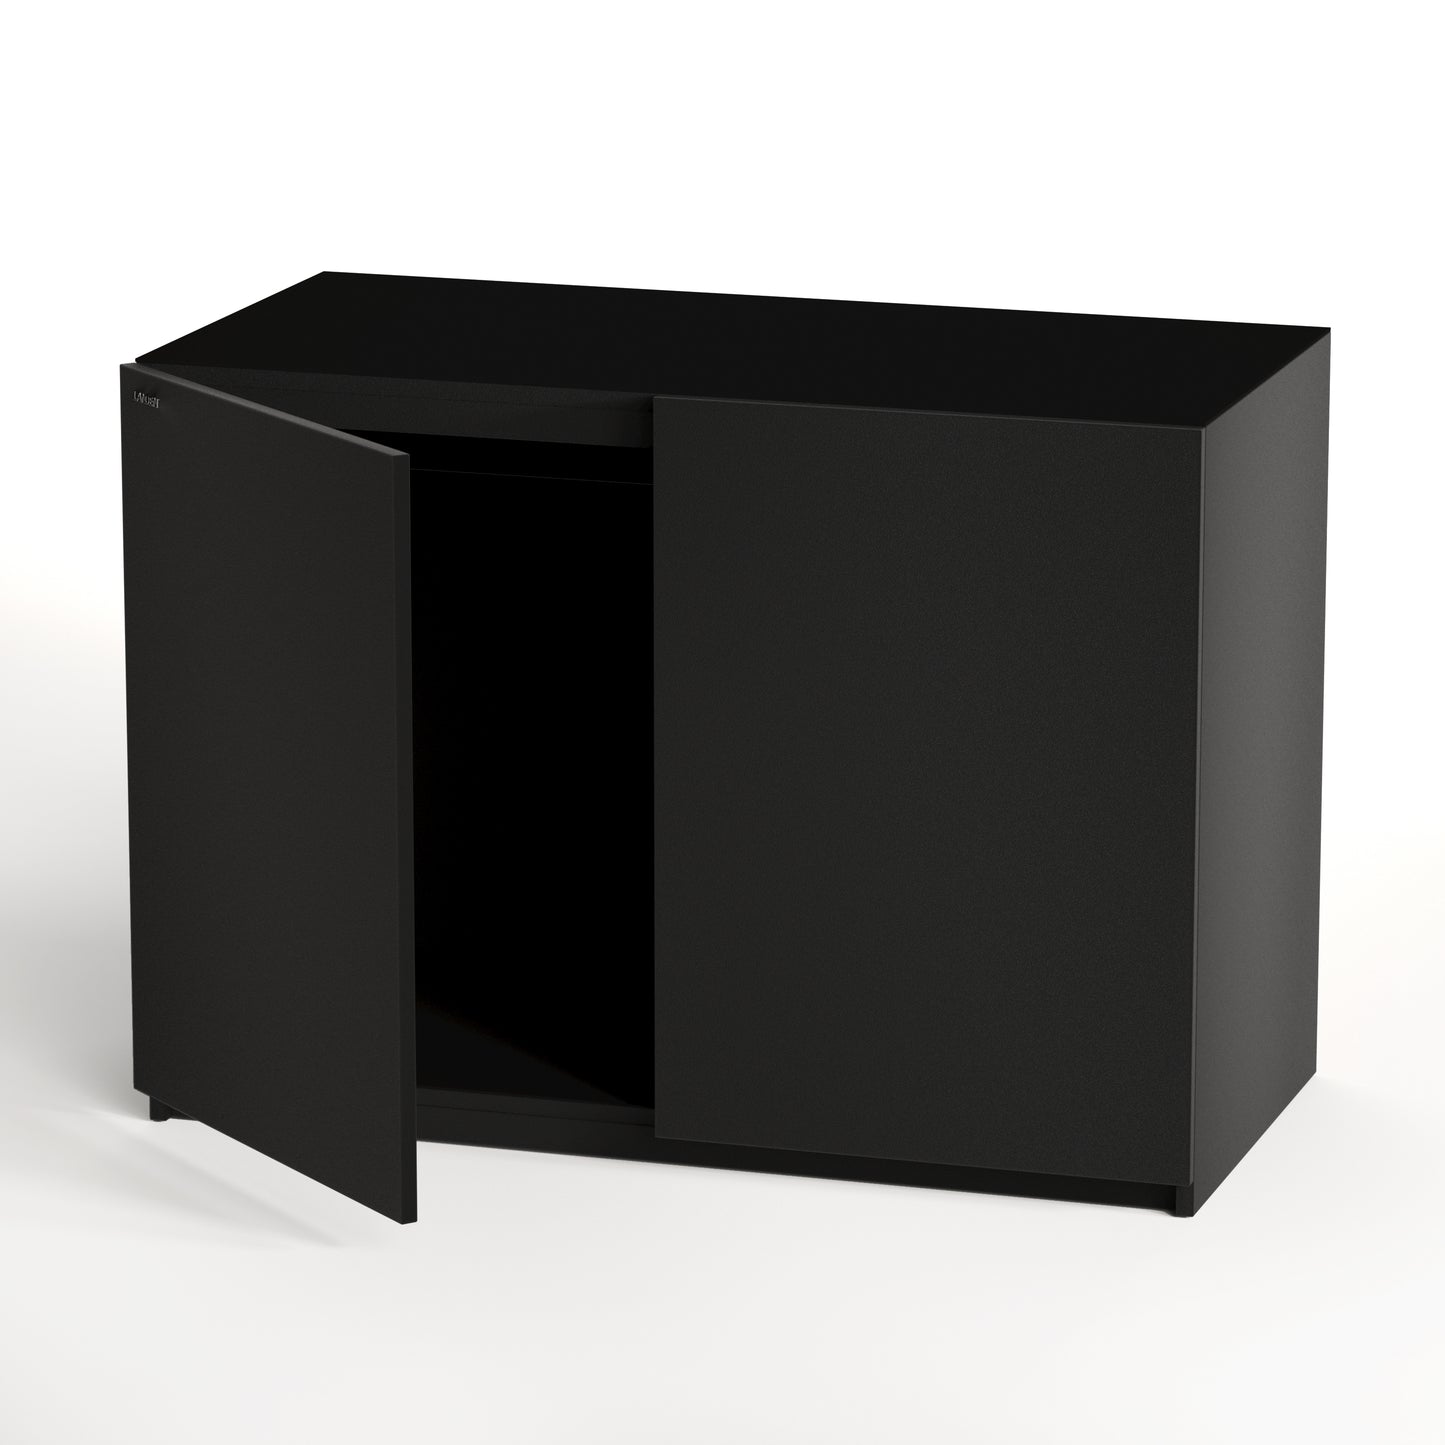 LANDEN Aquarium Stand and Cabinet, for 80Gal Tank, Matte Black Painted(Stand Only) W47.24xD23.62xH33.86 in(120x60x86cm)